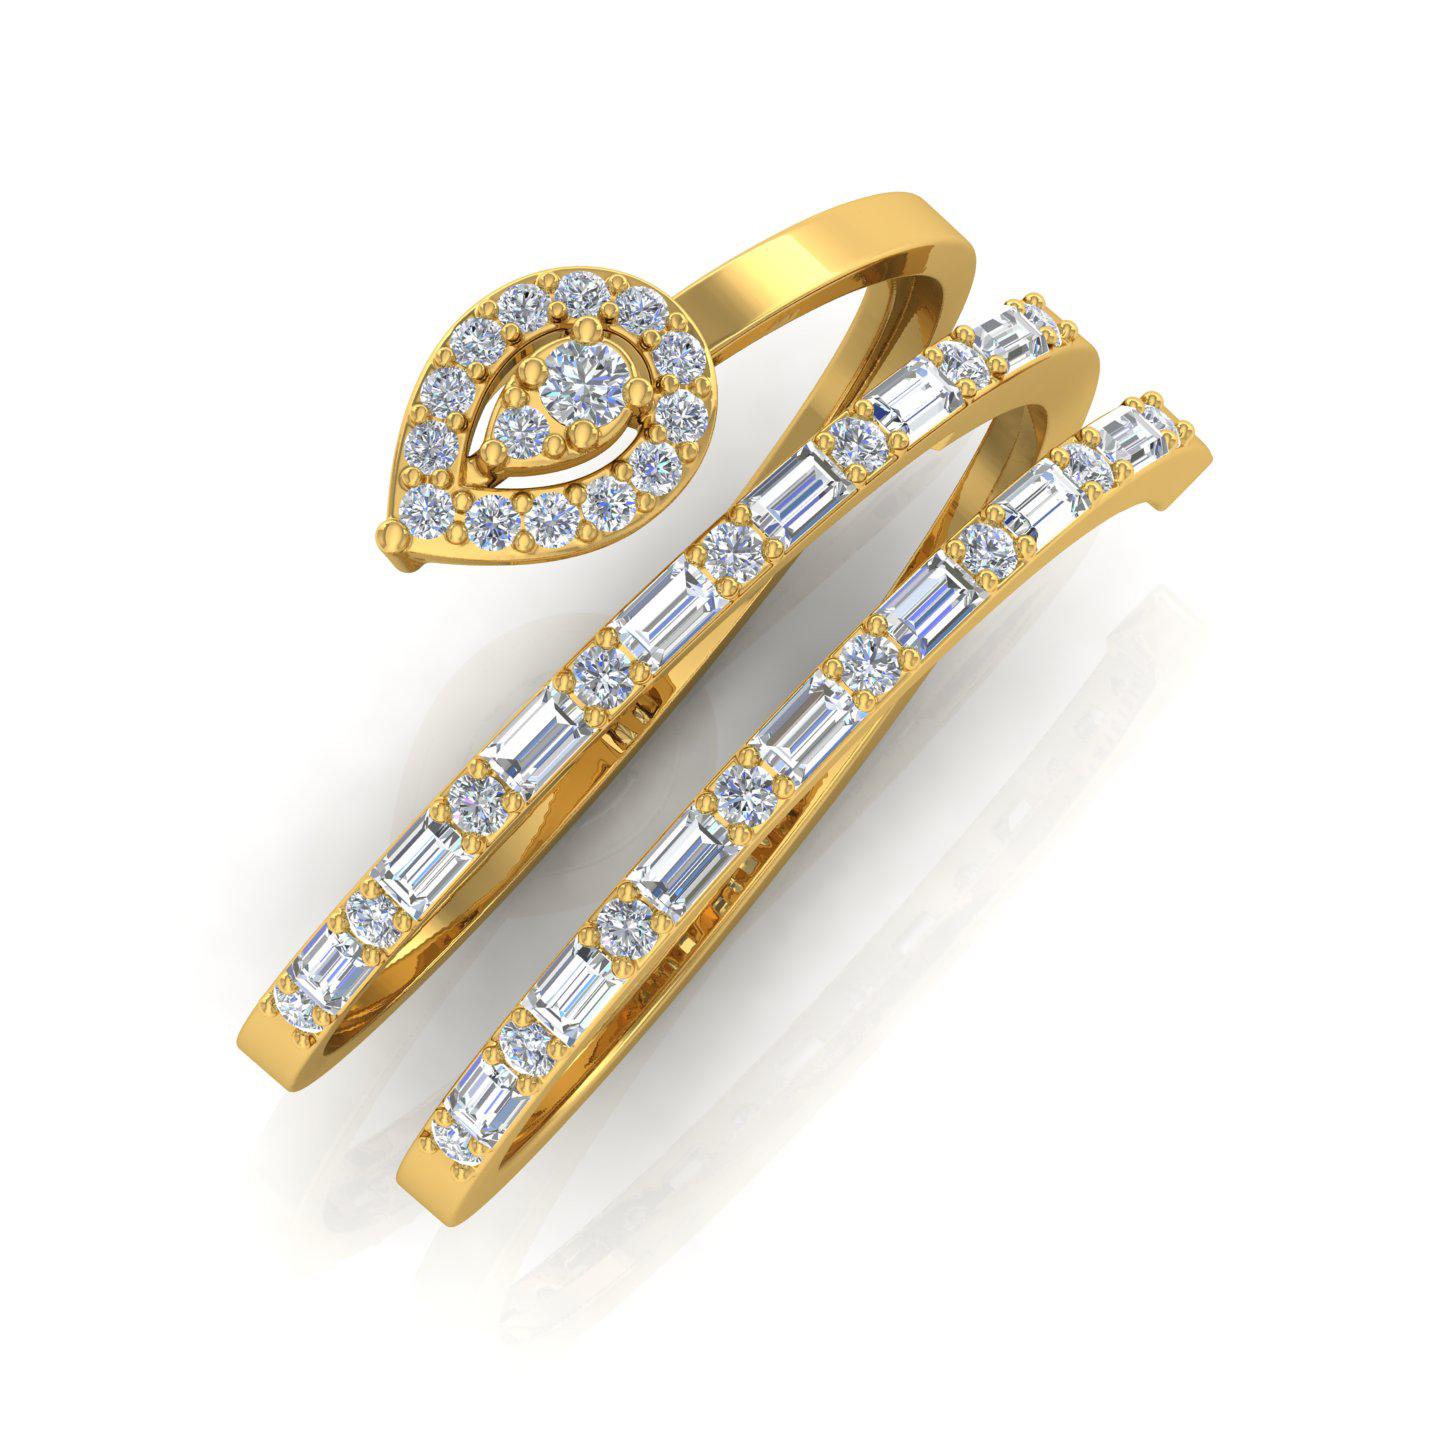 For Sale:  SI Clarity HI Color Baguette Diamond Spiral Ring 18 Karat Yellow Gold Jewelry 5